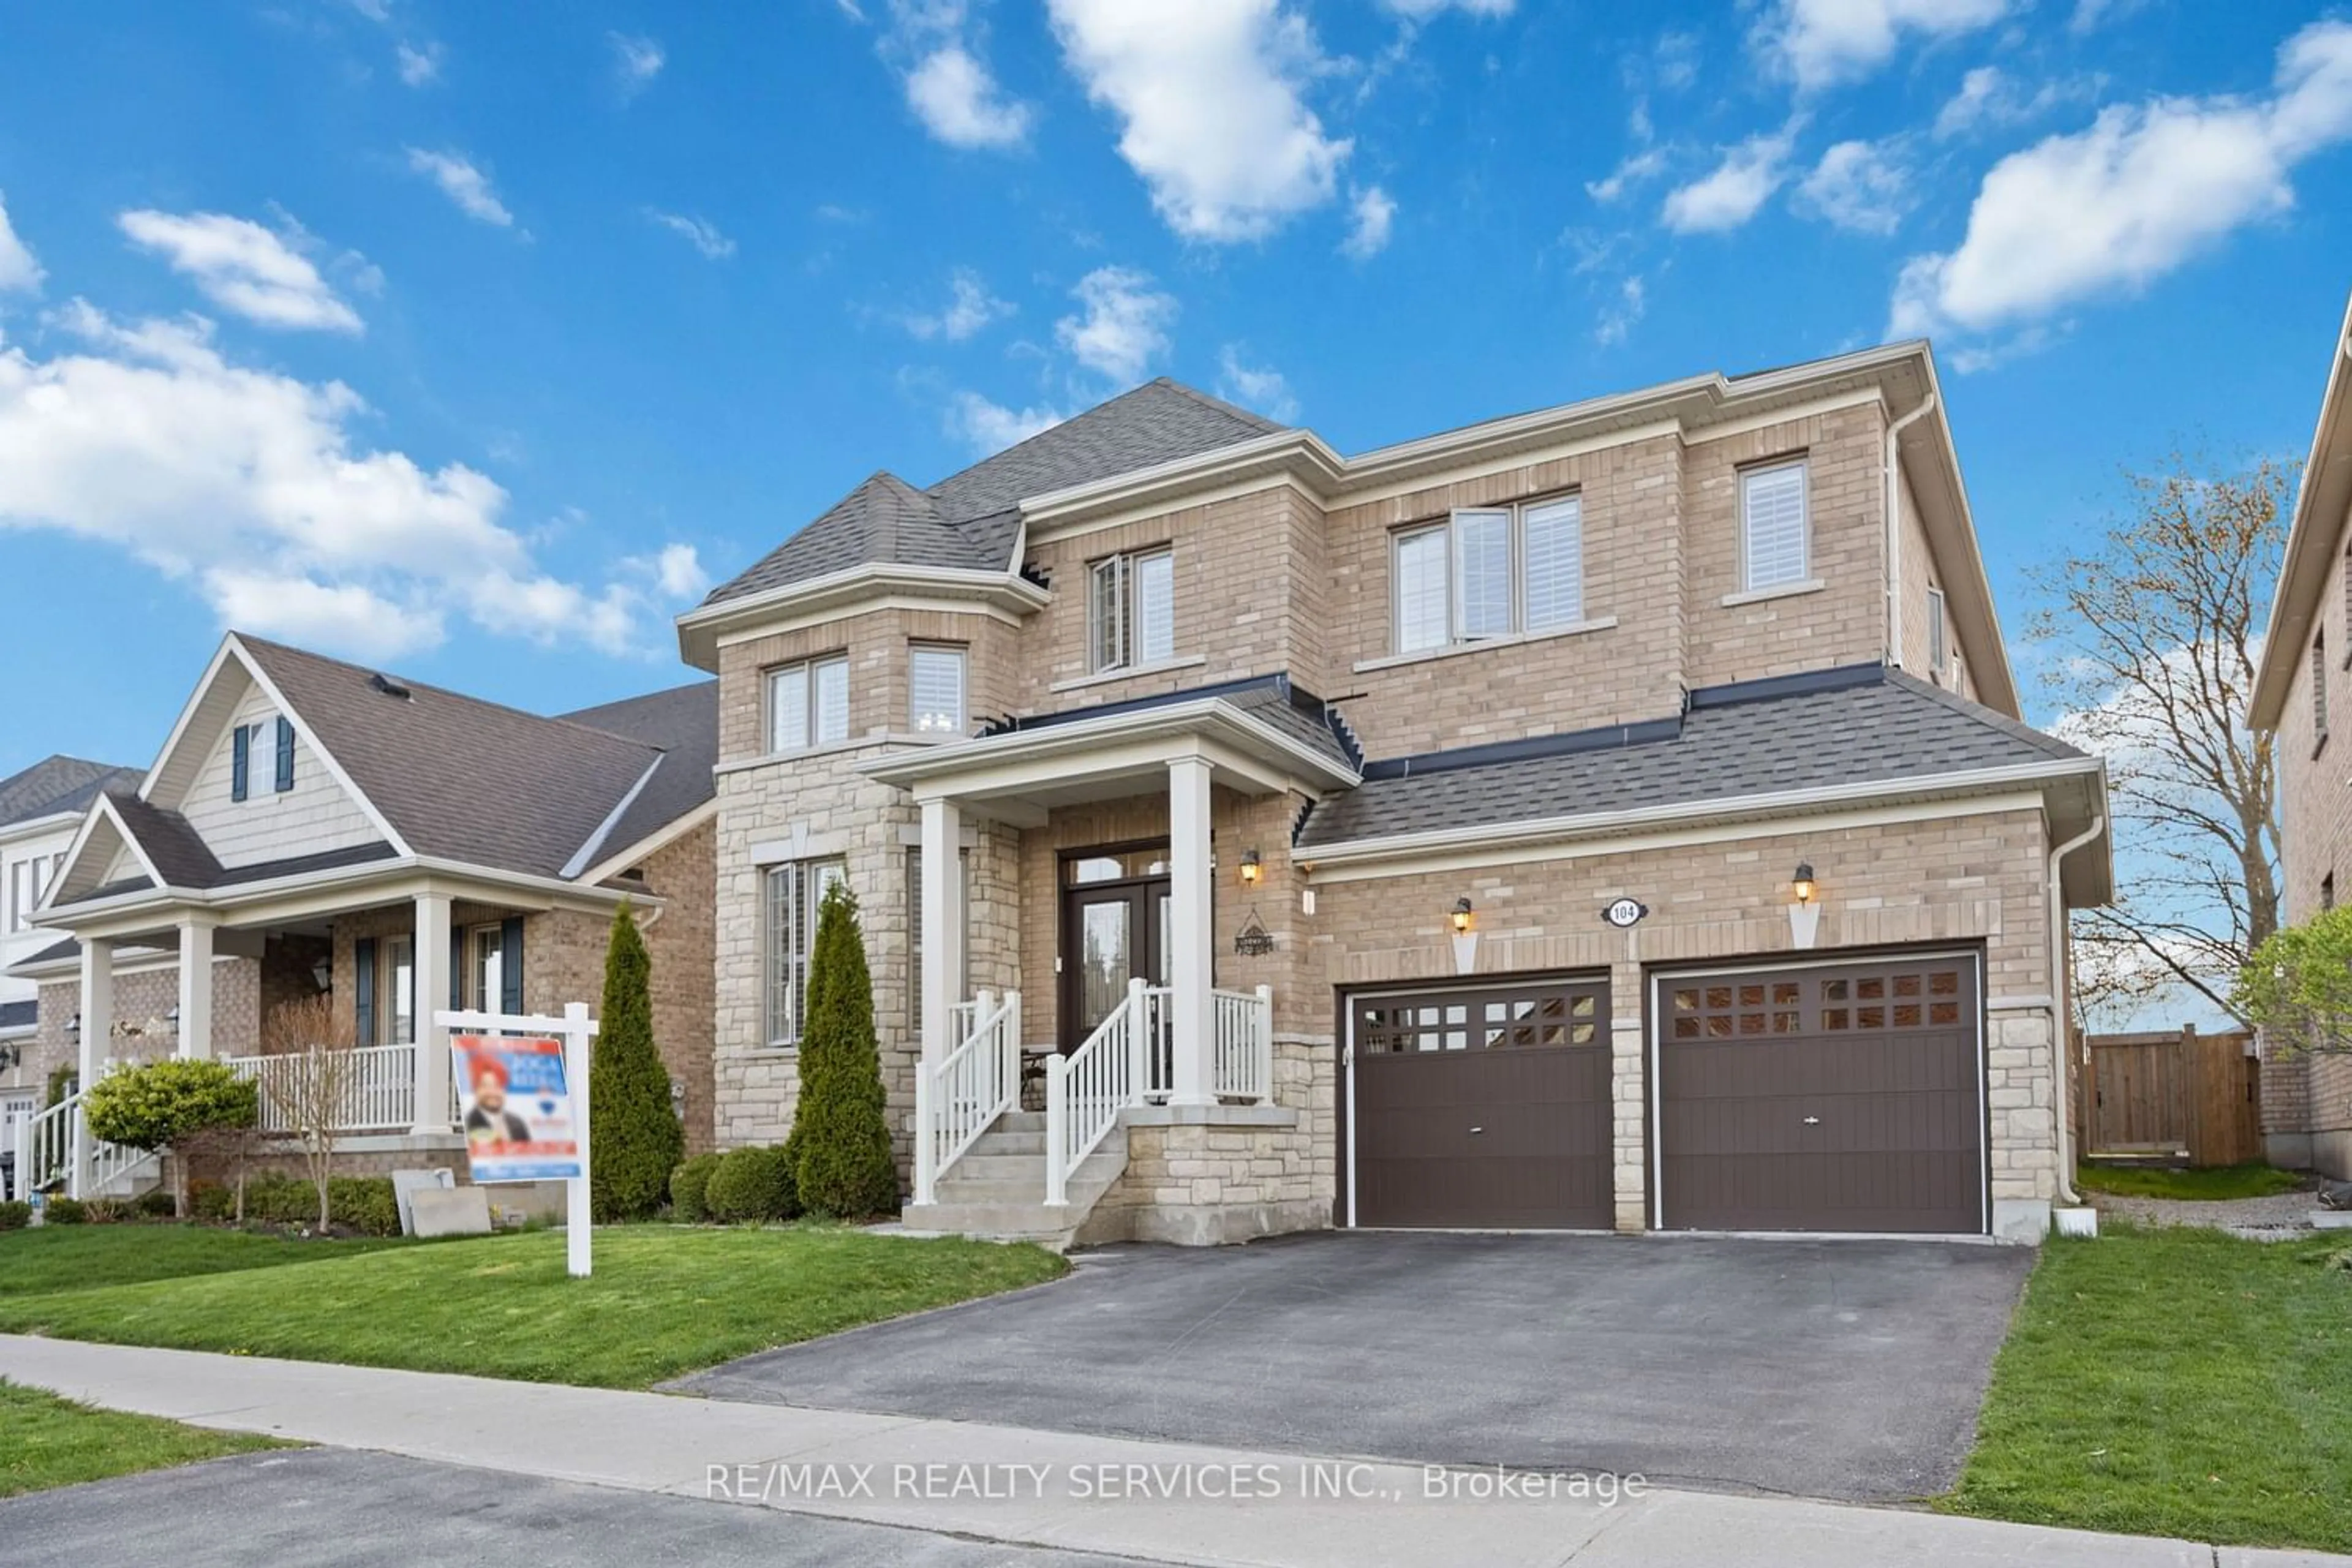 Home with brick exterior material for 104 Sharpe Cres, New Tecumseth Ontario L0G 1W0